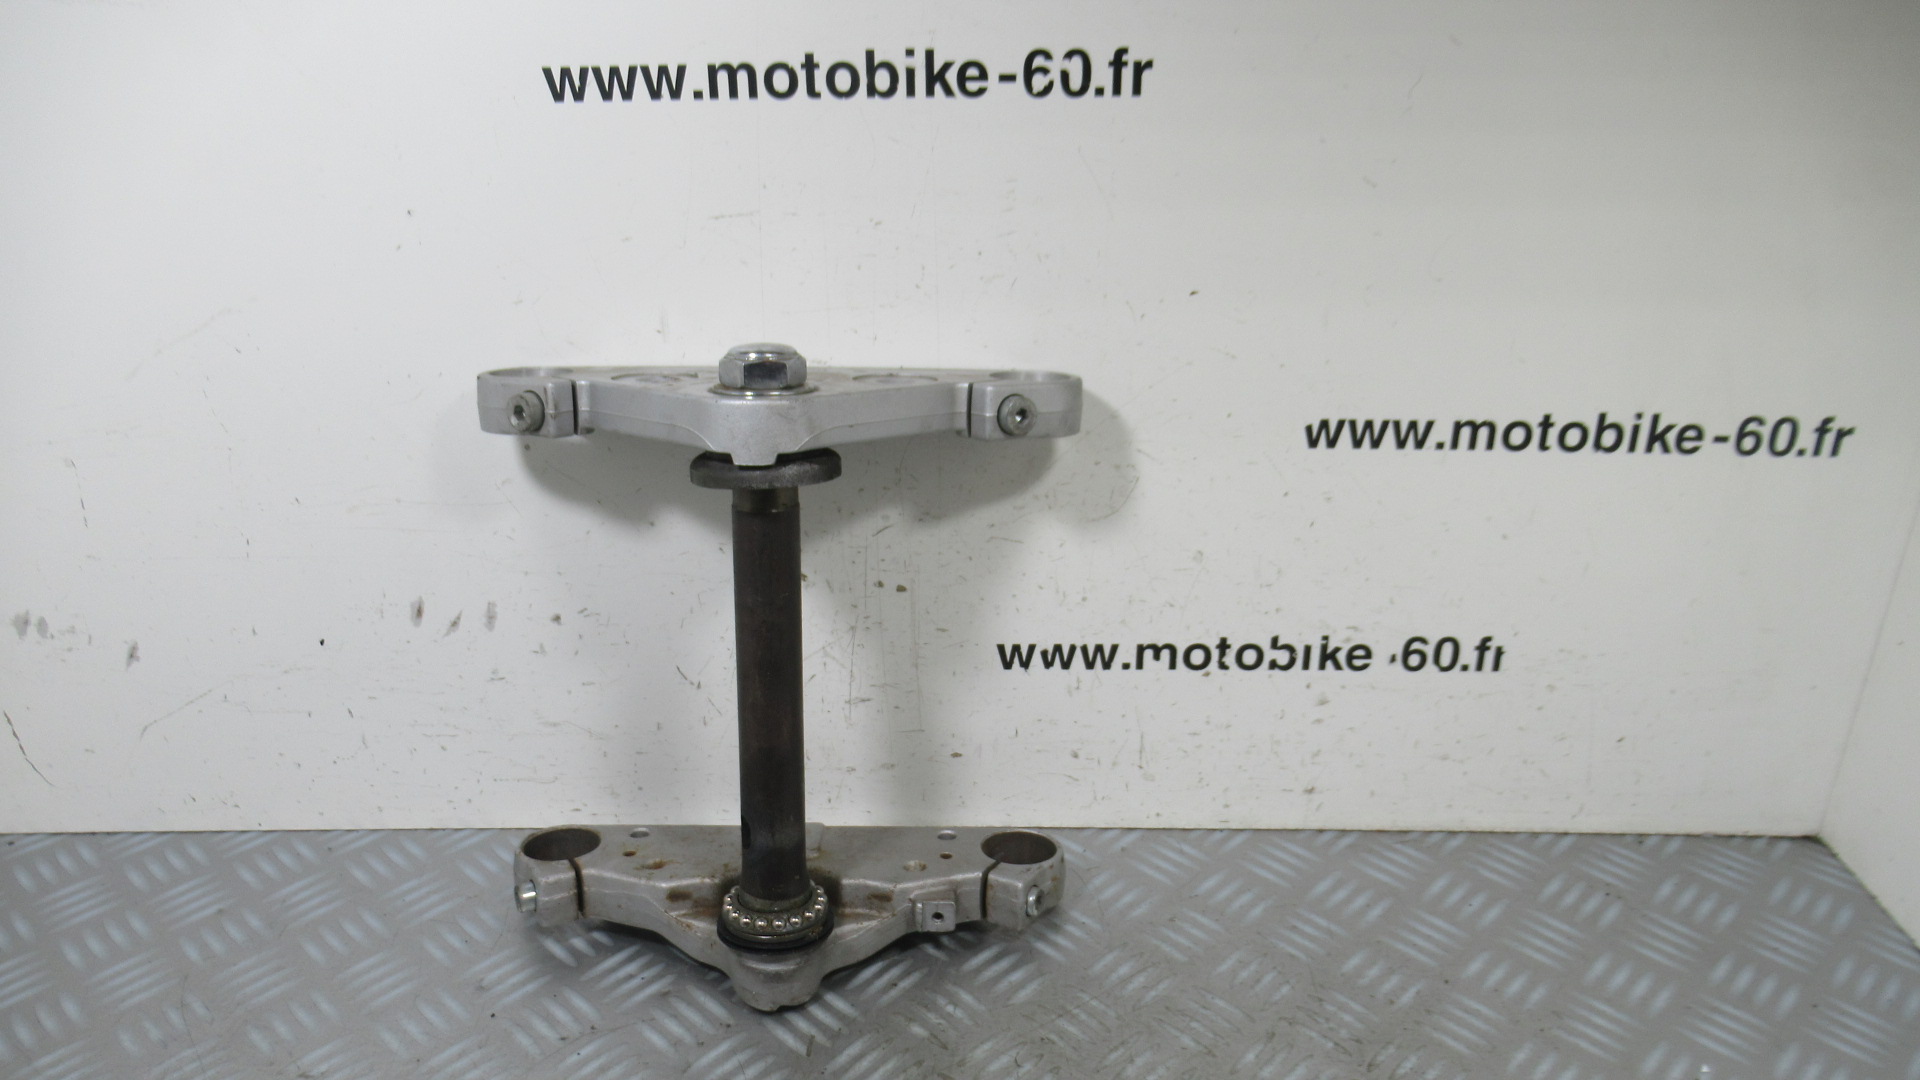 Tes fourche Honda Shadow 125 4t (complet)